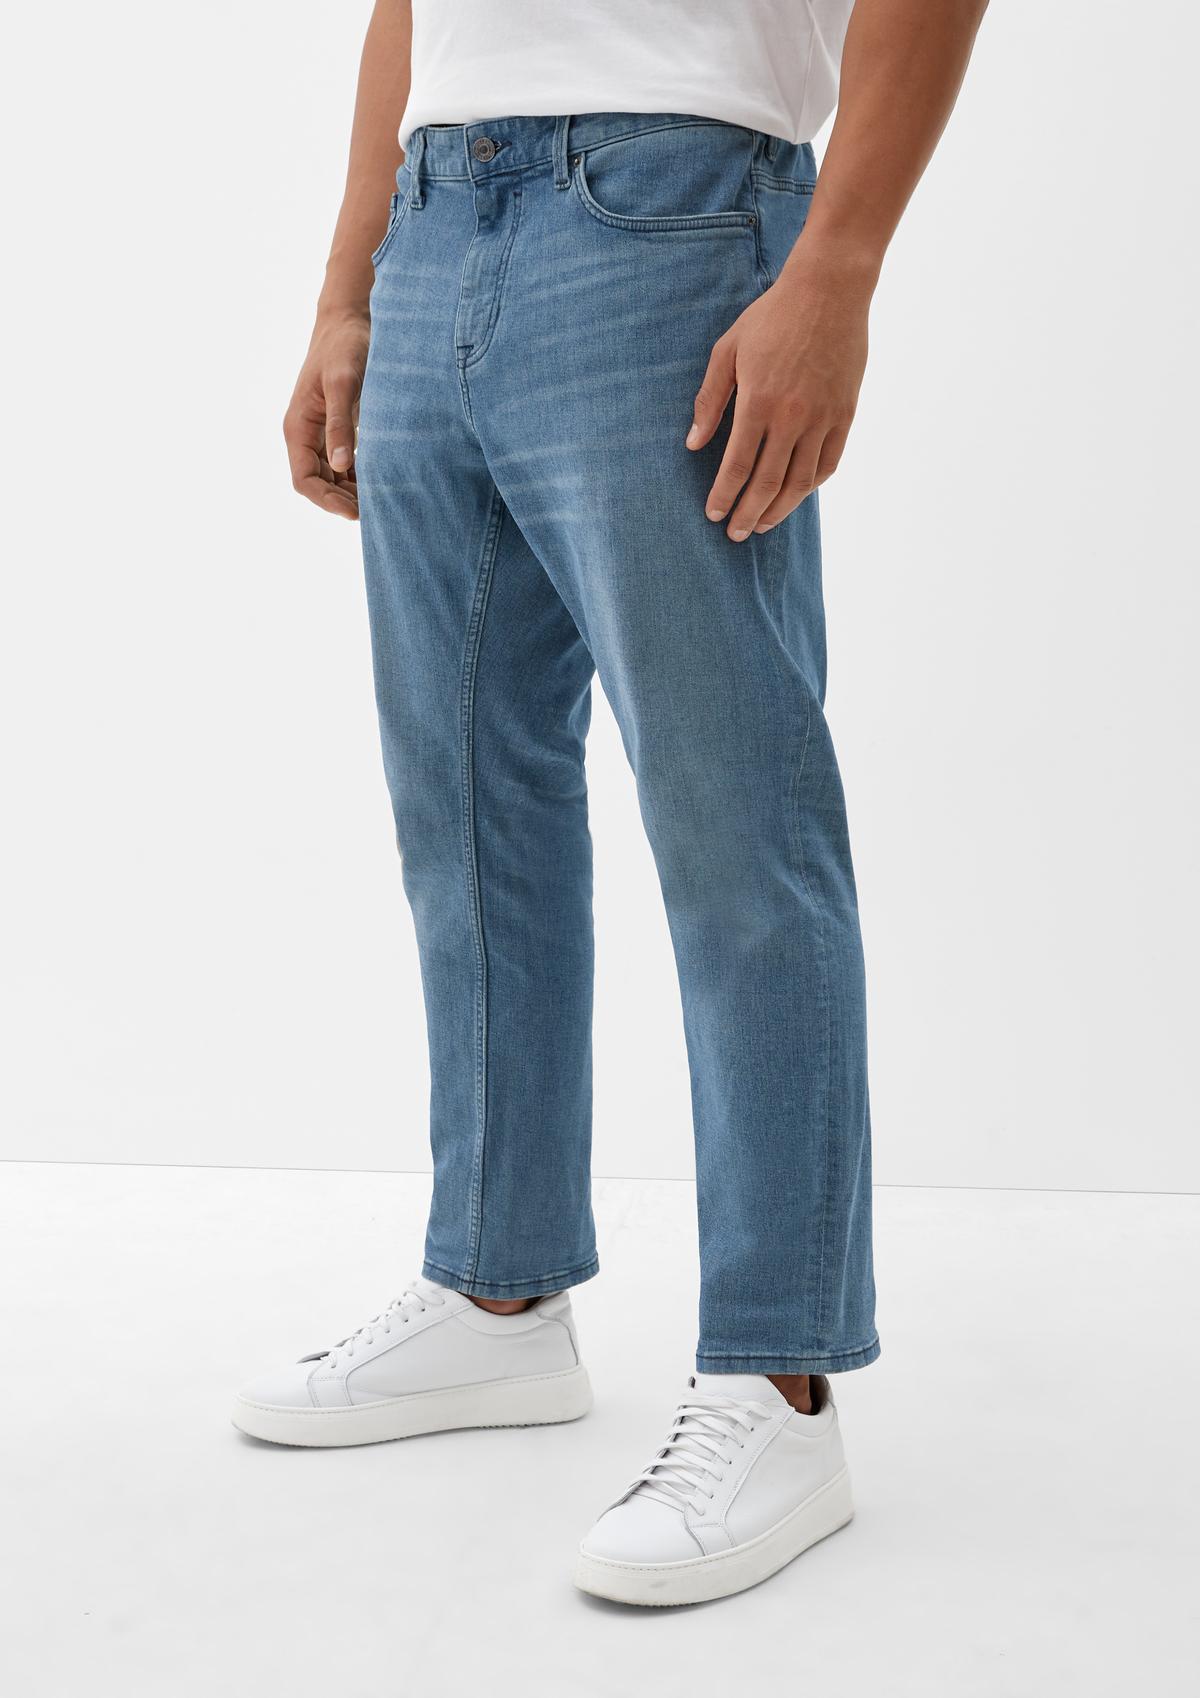 s.Oliver Casby jeans / relaxed fit / mid rise / straight leg